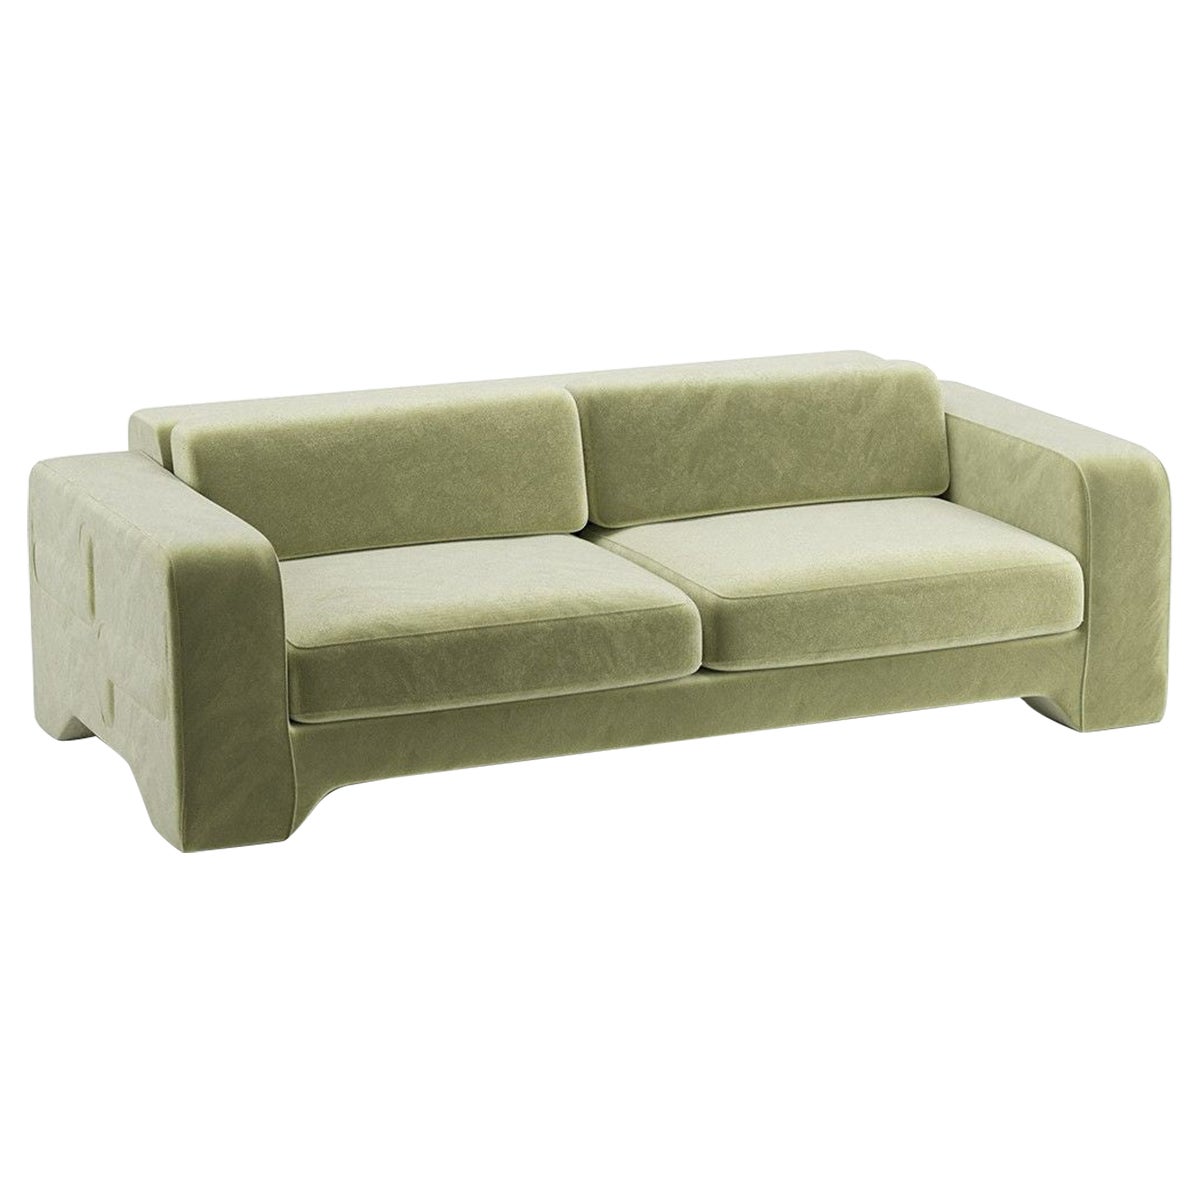 Popus Editions Giovanna 3 Seater Sofa in Almond Green Como Velvet Upholstery For Sale